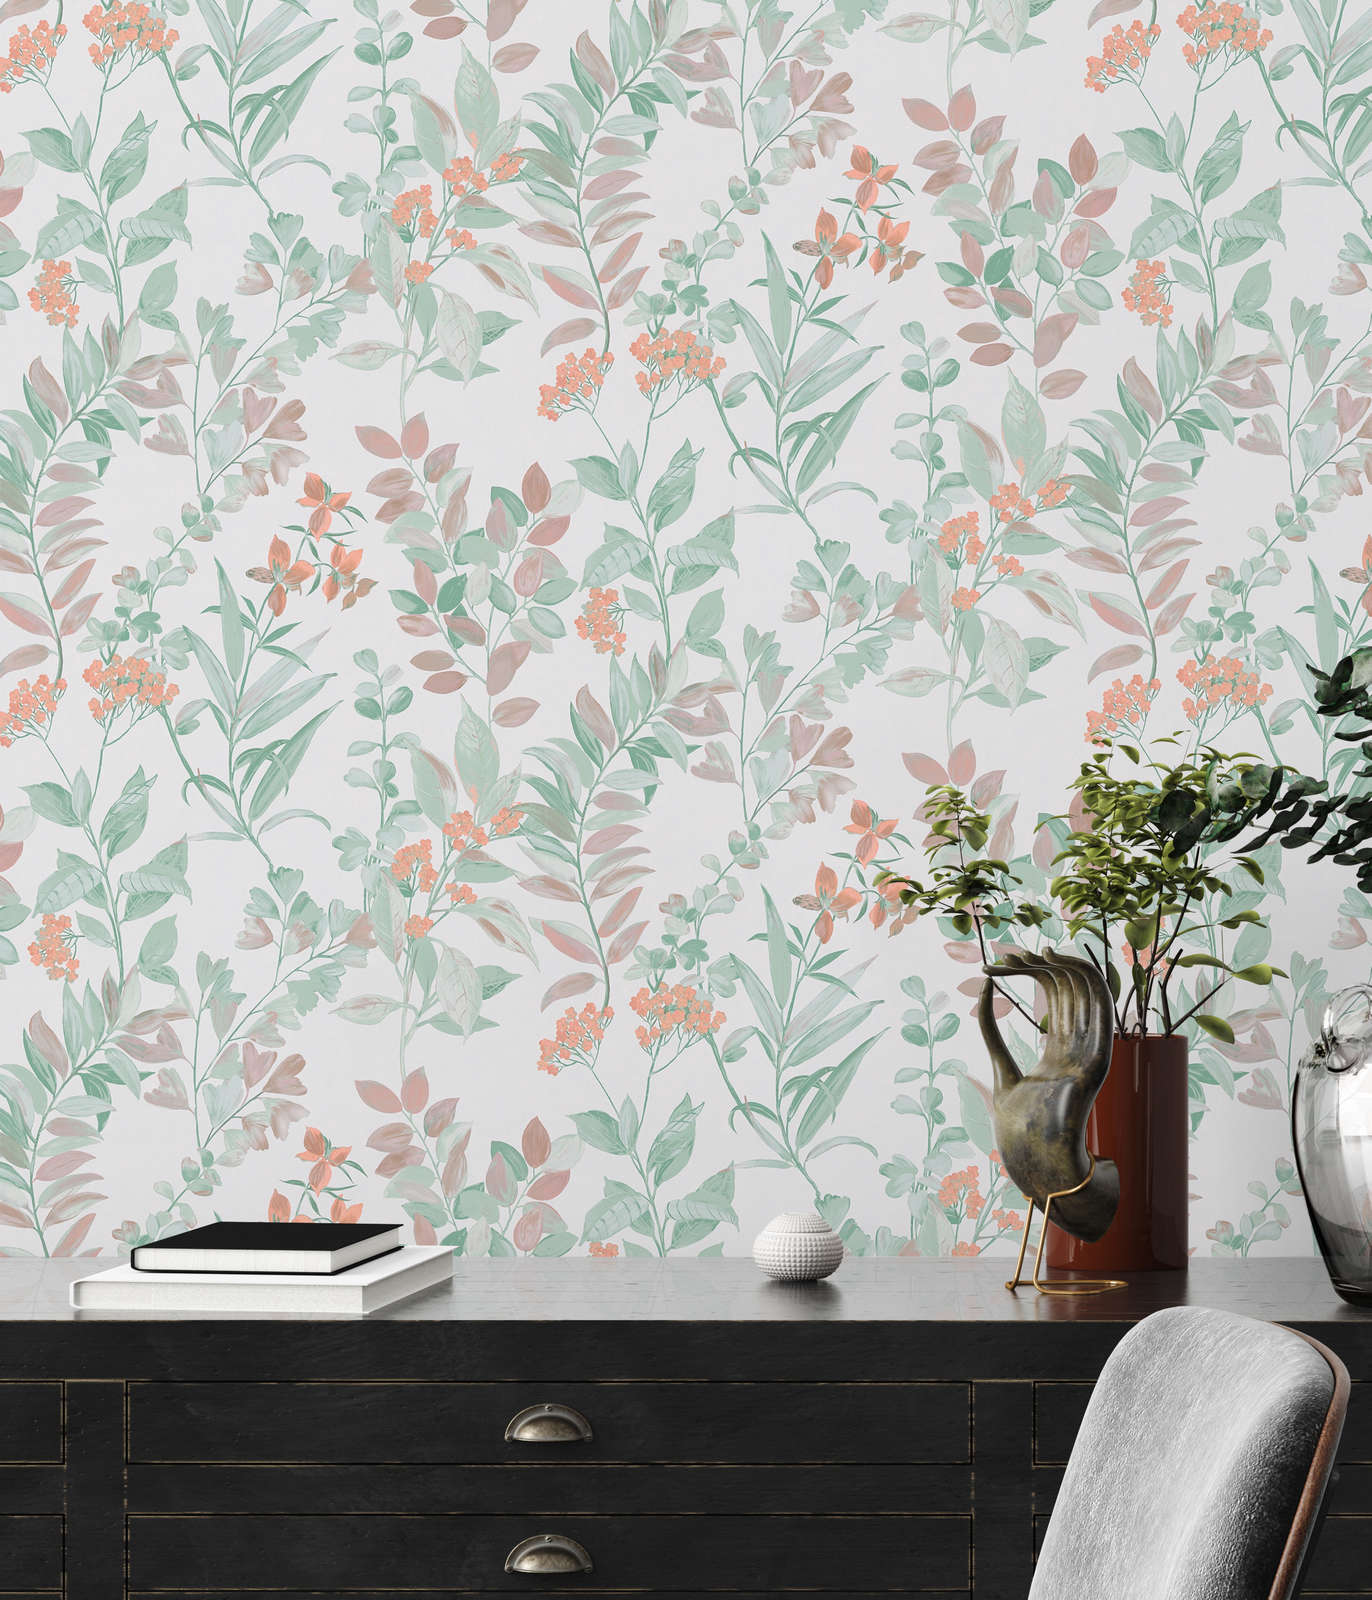             Non-woven wallpaper with floral pattern - multicoloured, green, white
        